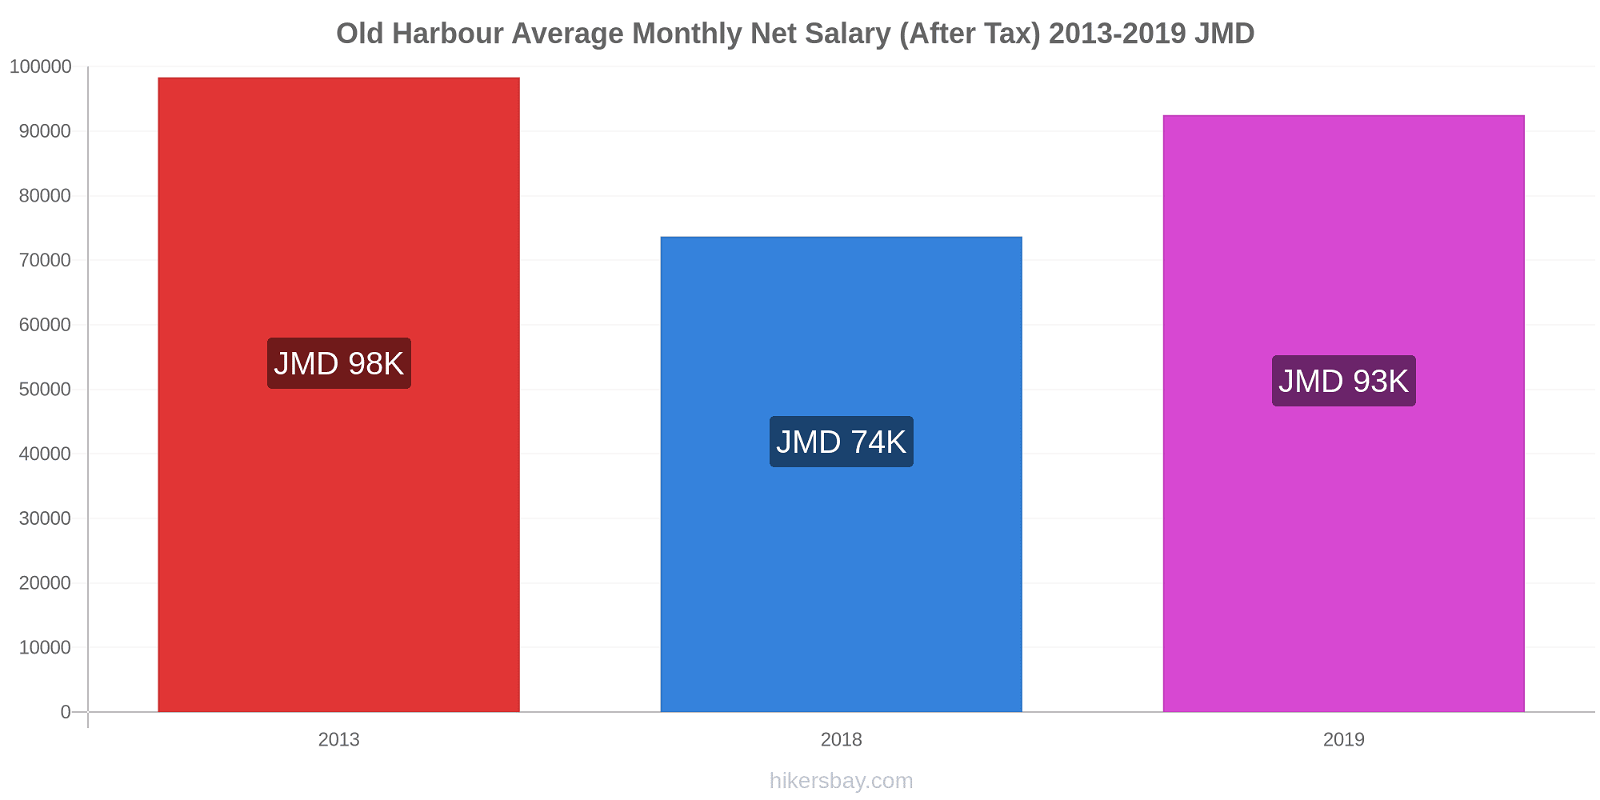 Old Harbour price changes Average Monthly Net Salary (After Tax) hikersbay.com